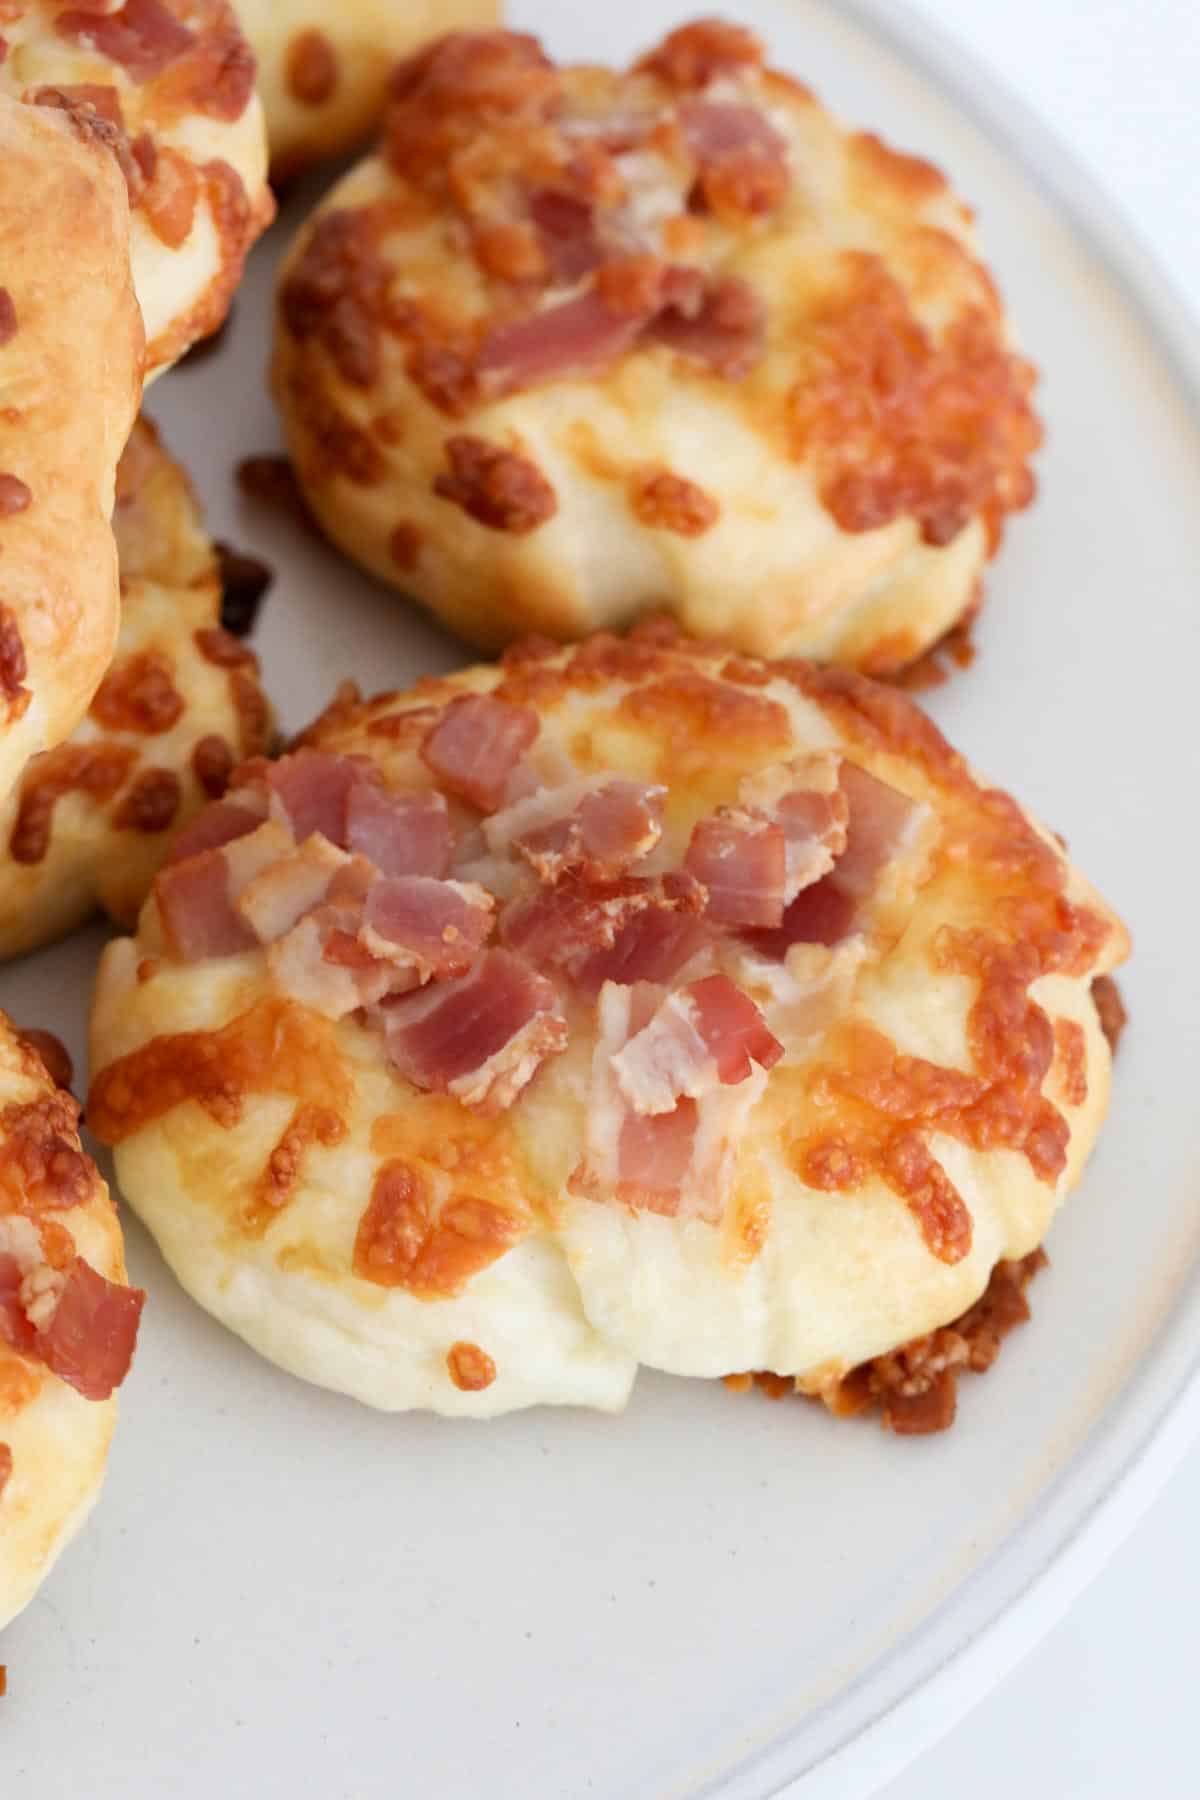 Bread rolls topped with golden cheese and bacon pieces.